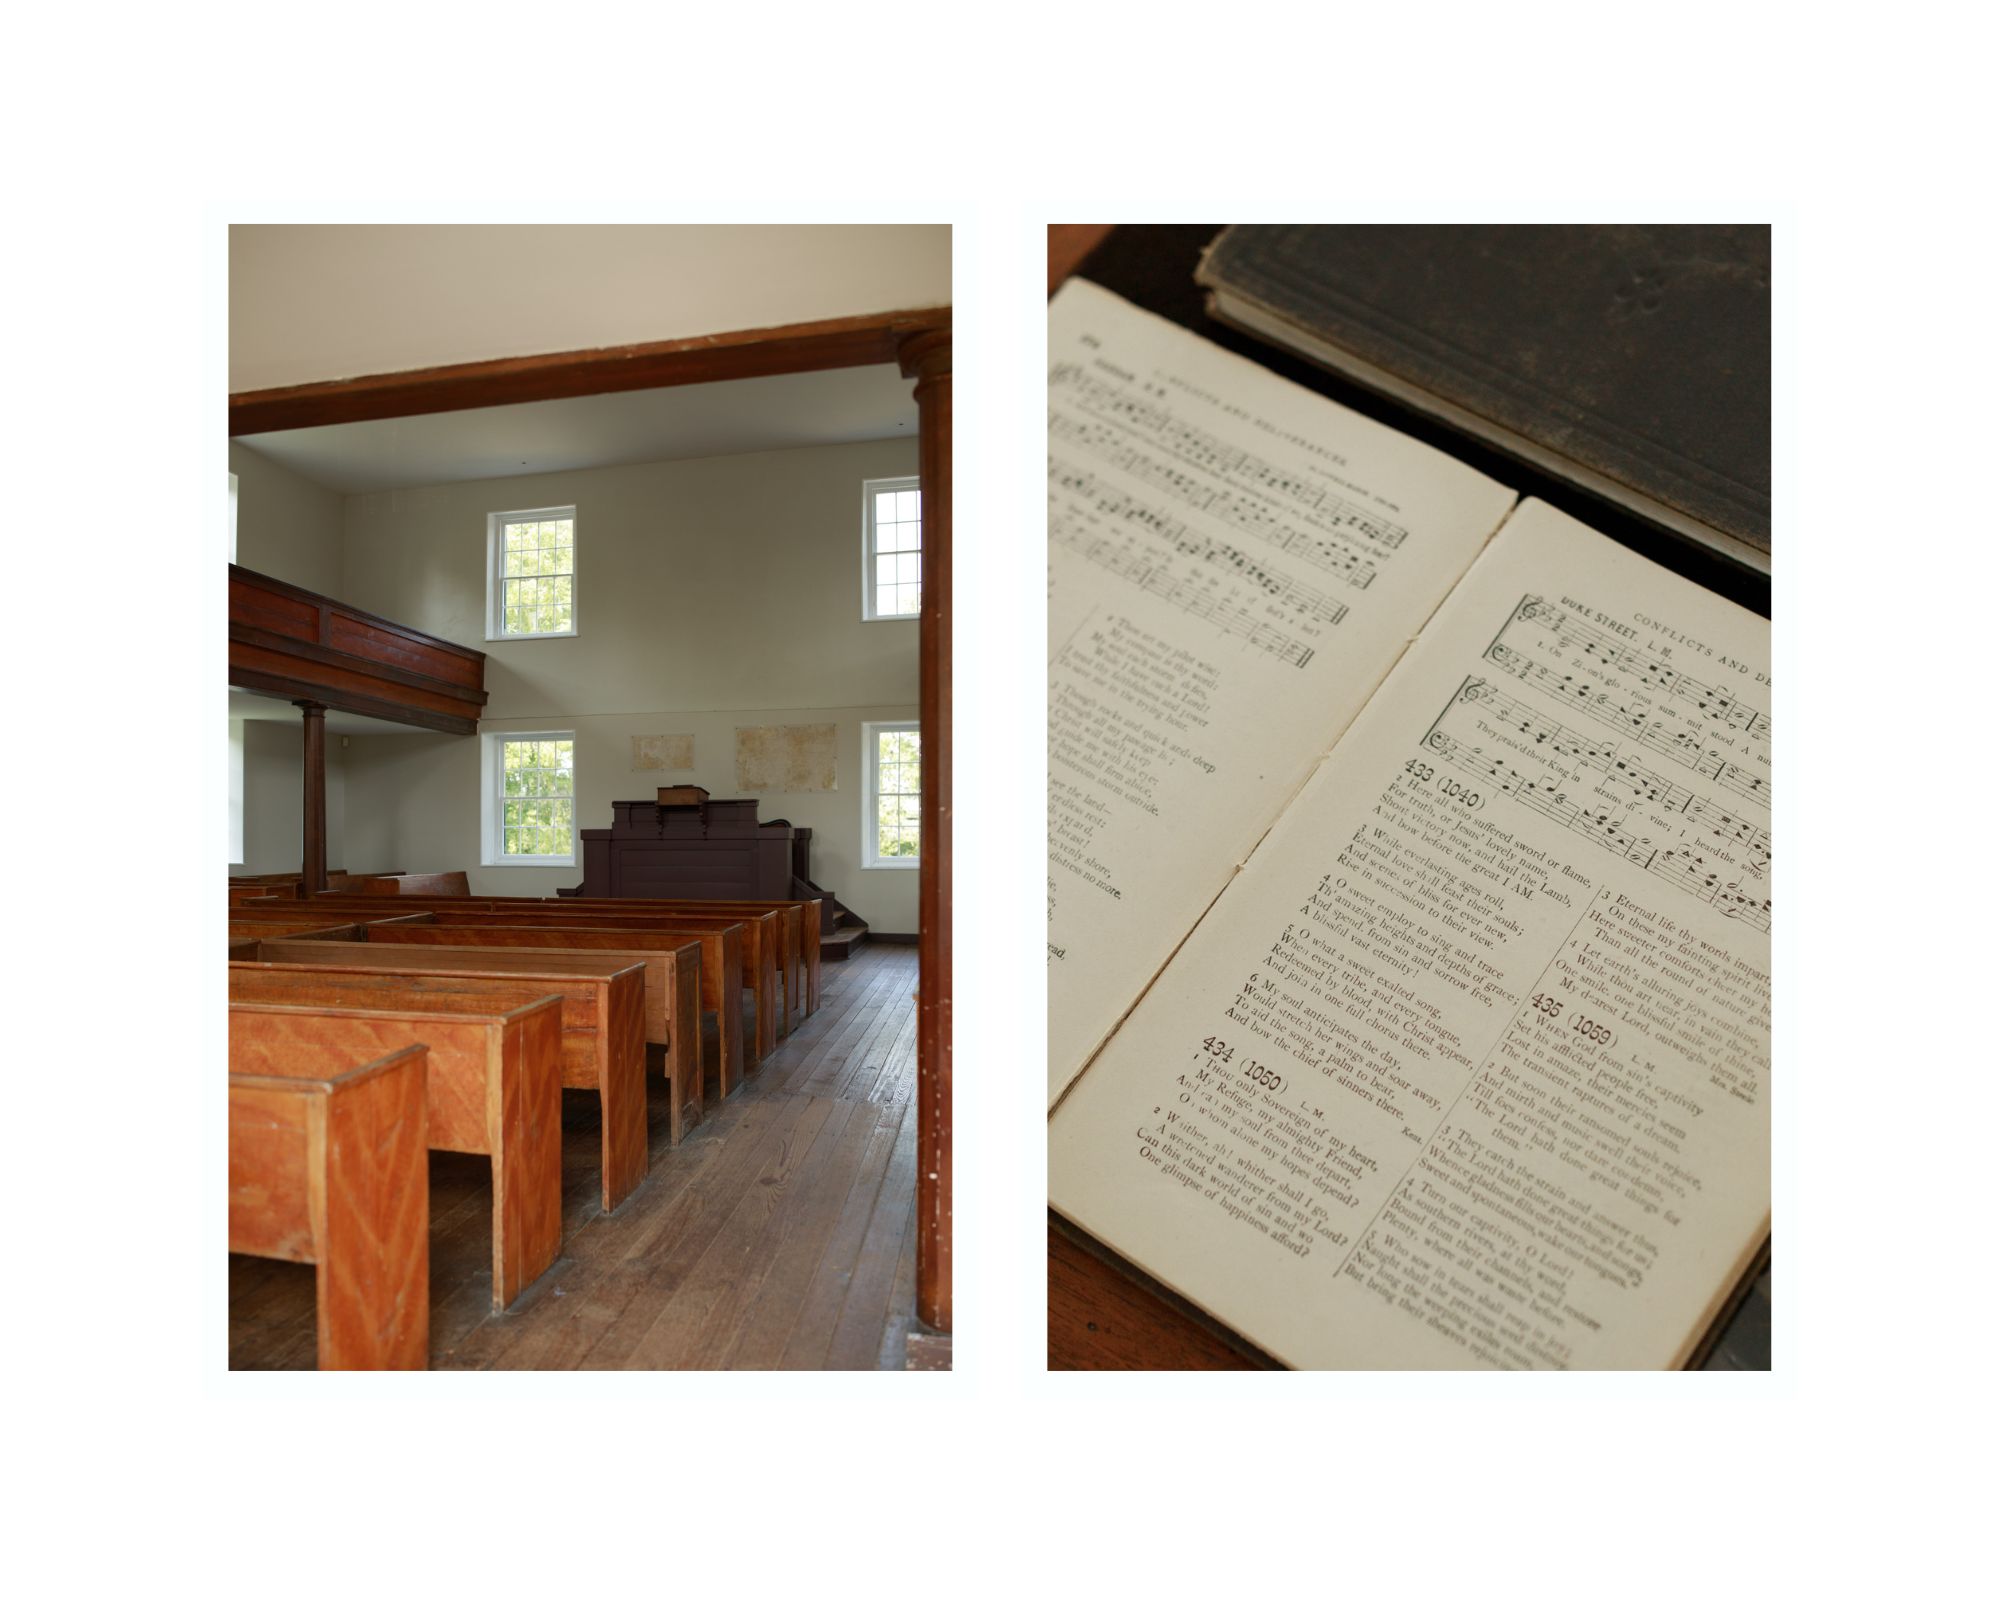 An interior view of Mt. Zion (left) and an old hymnal found in the church (right).